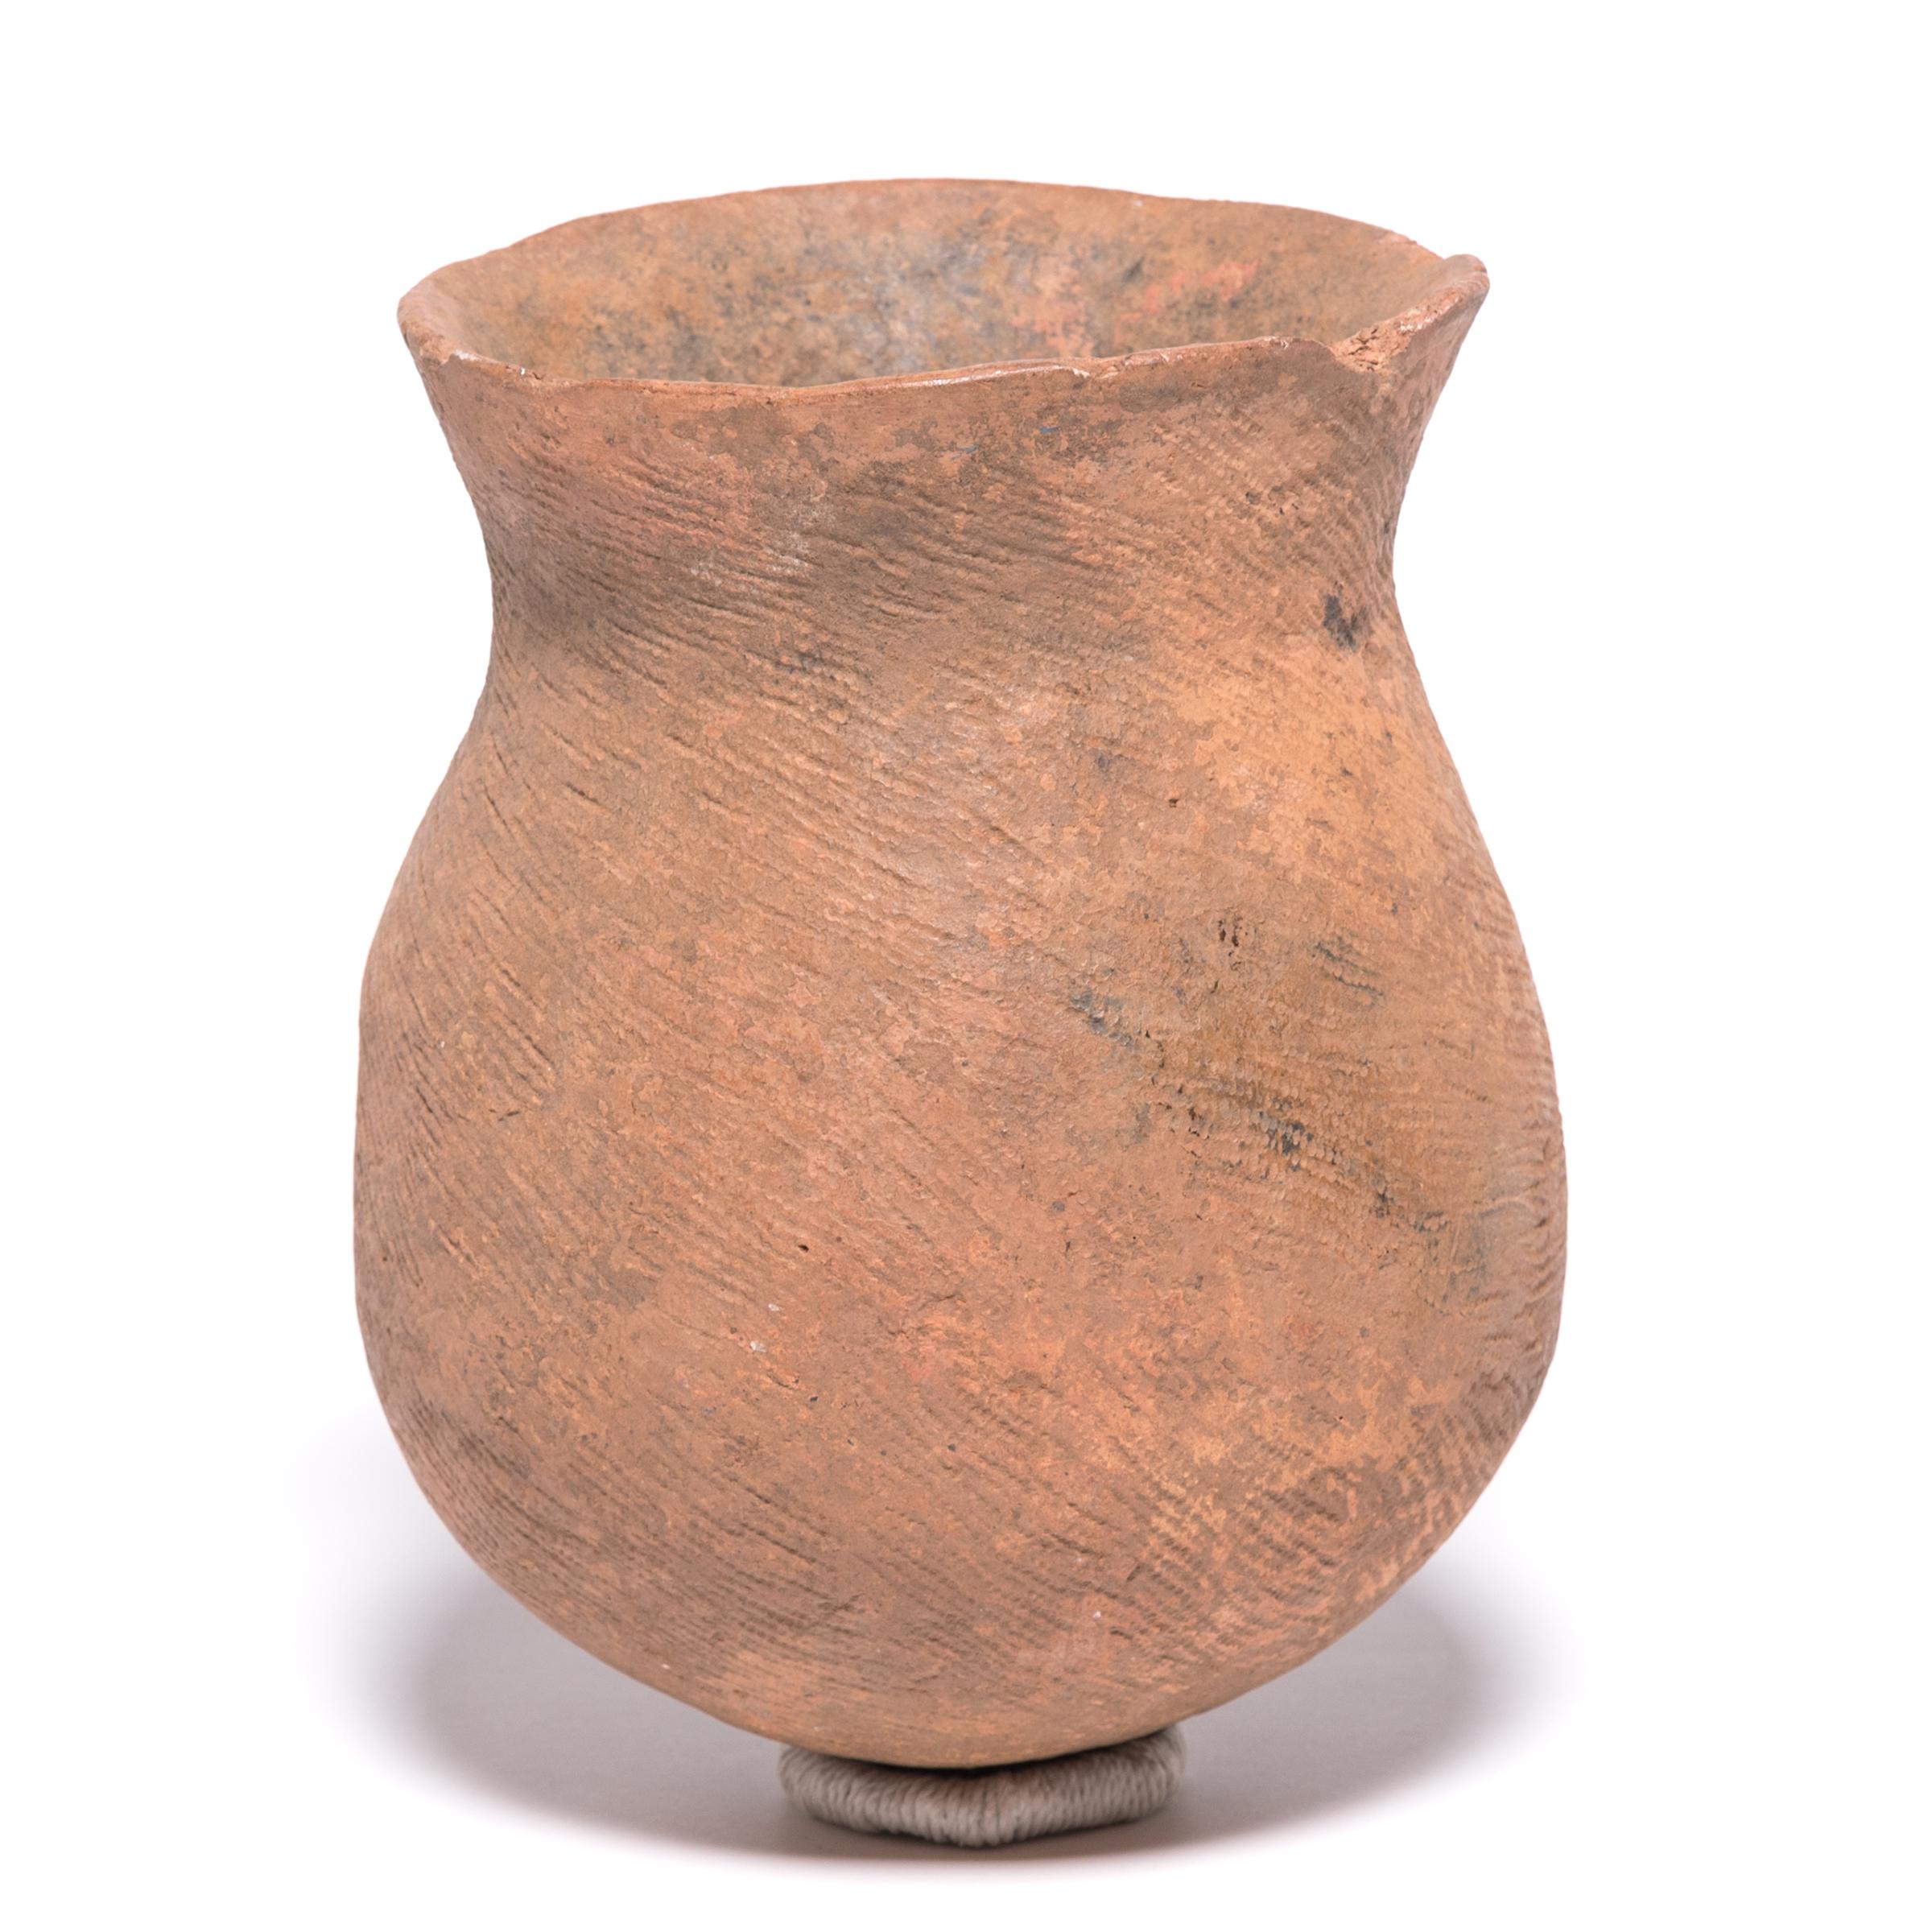 In spite of terra cotta's naturally earthy and solid presence, this tribal storage vessel has a fantastic sense of movement. The hand incised scarifications swirl through the solid ceramic, pulling the eye from the base of the vessel in a smooth